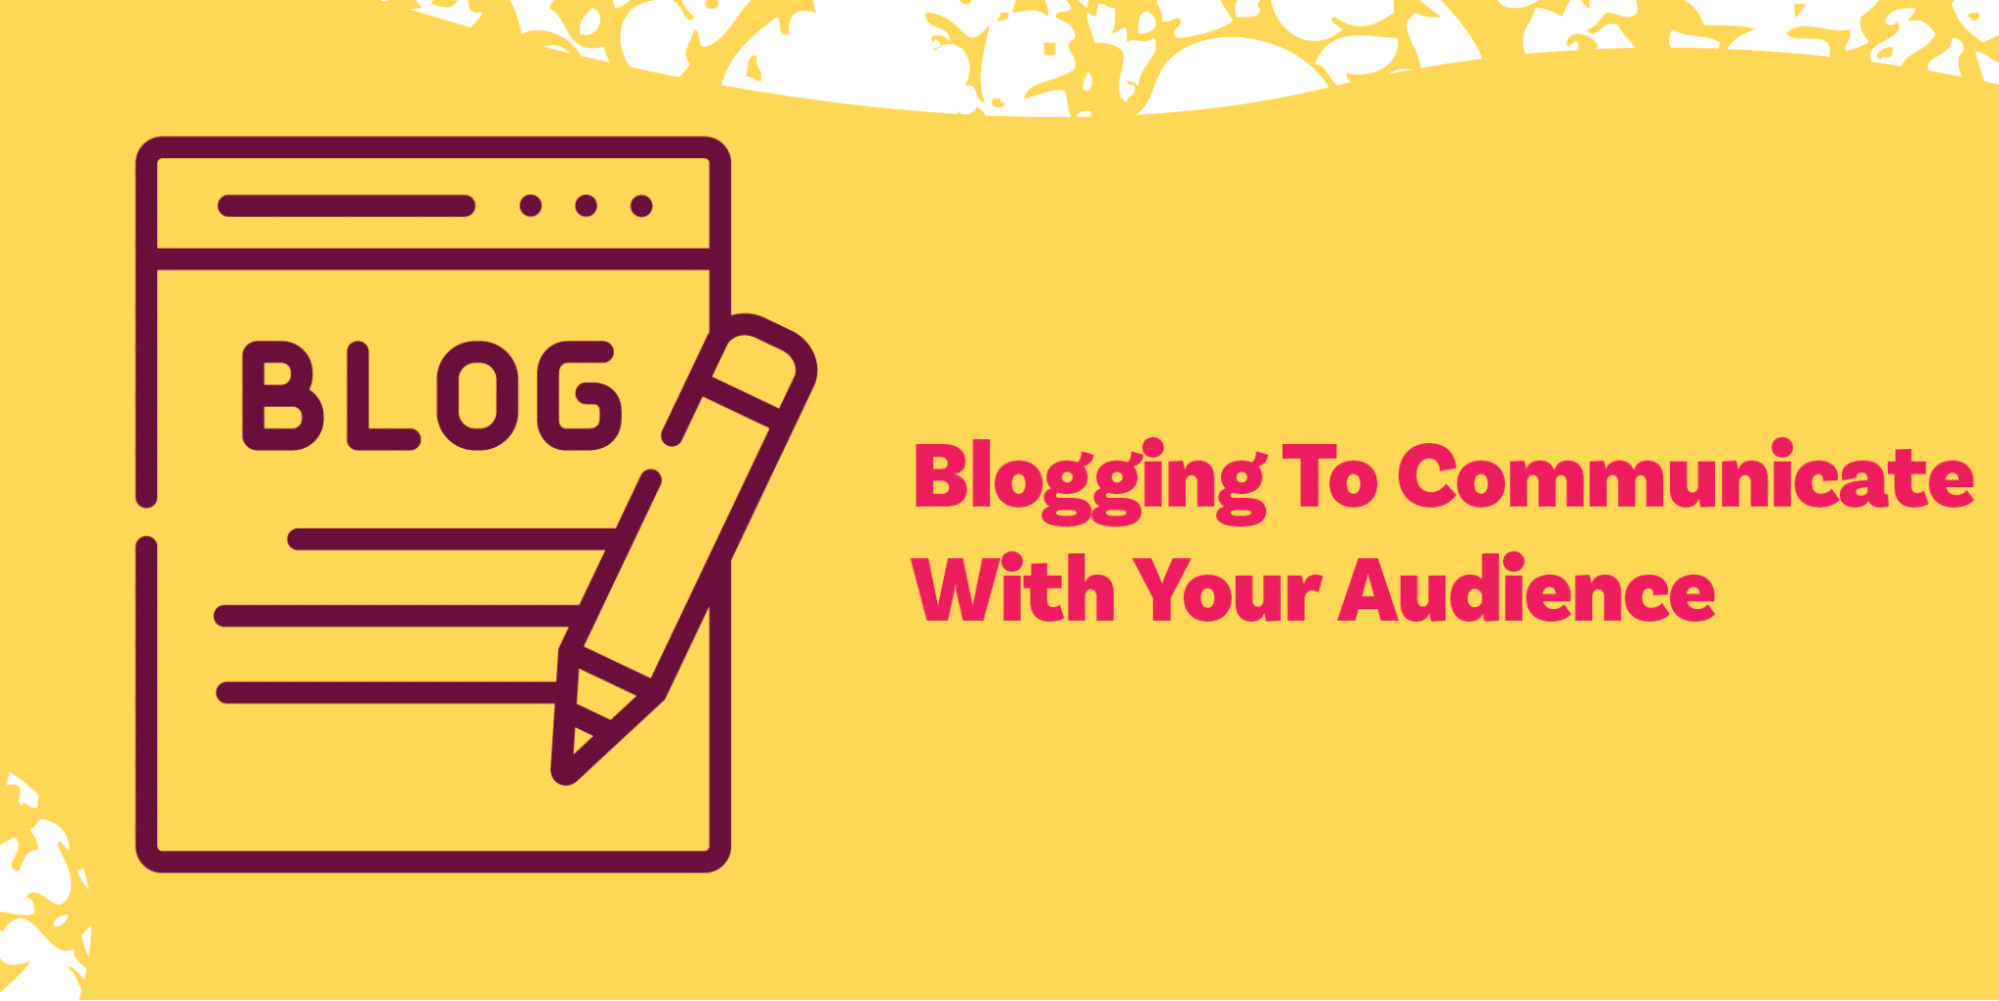 Blogging To Communicate With Your Audience